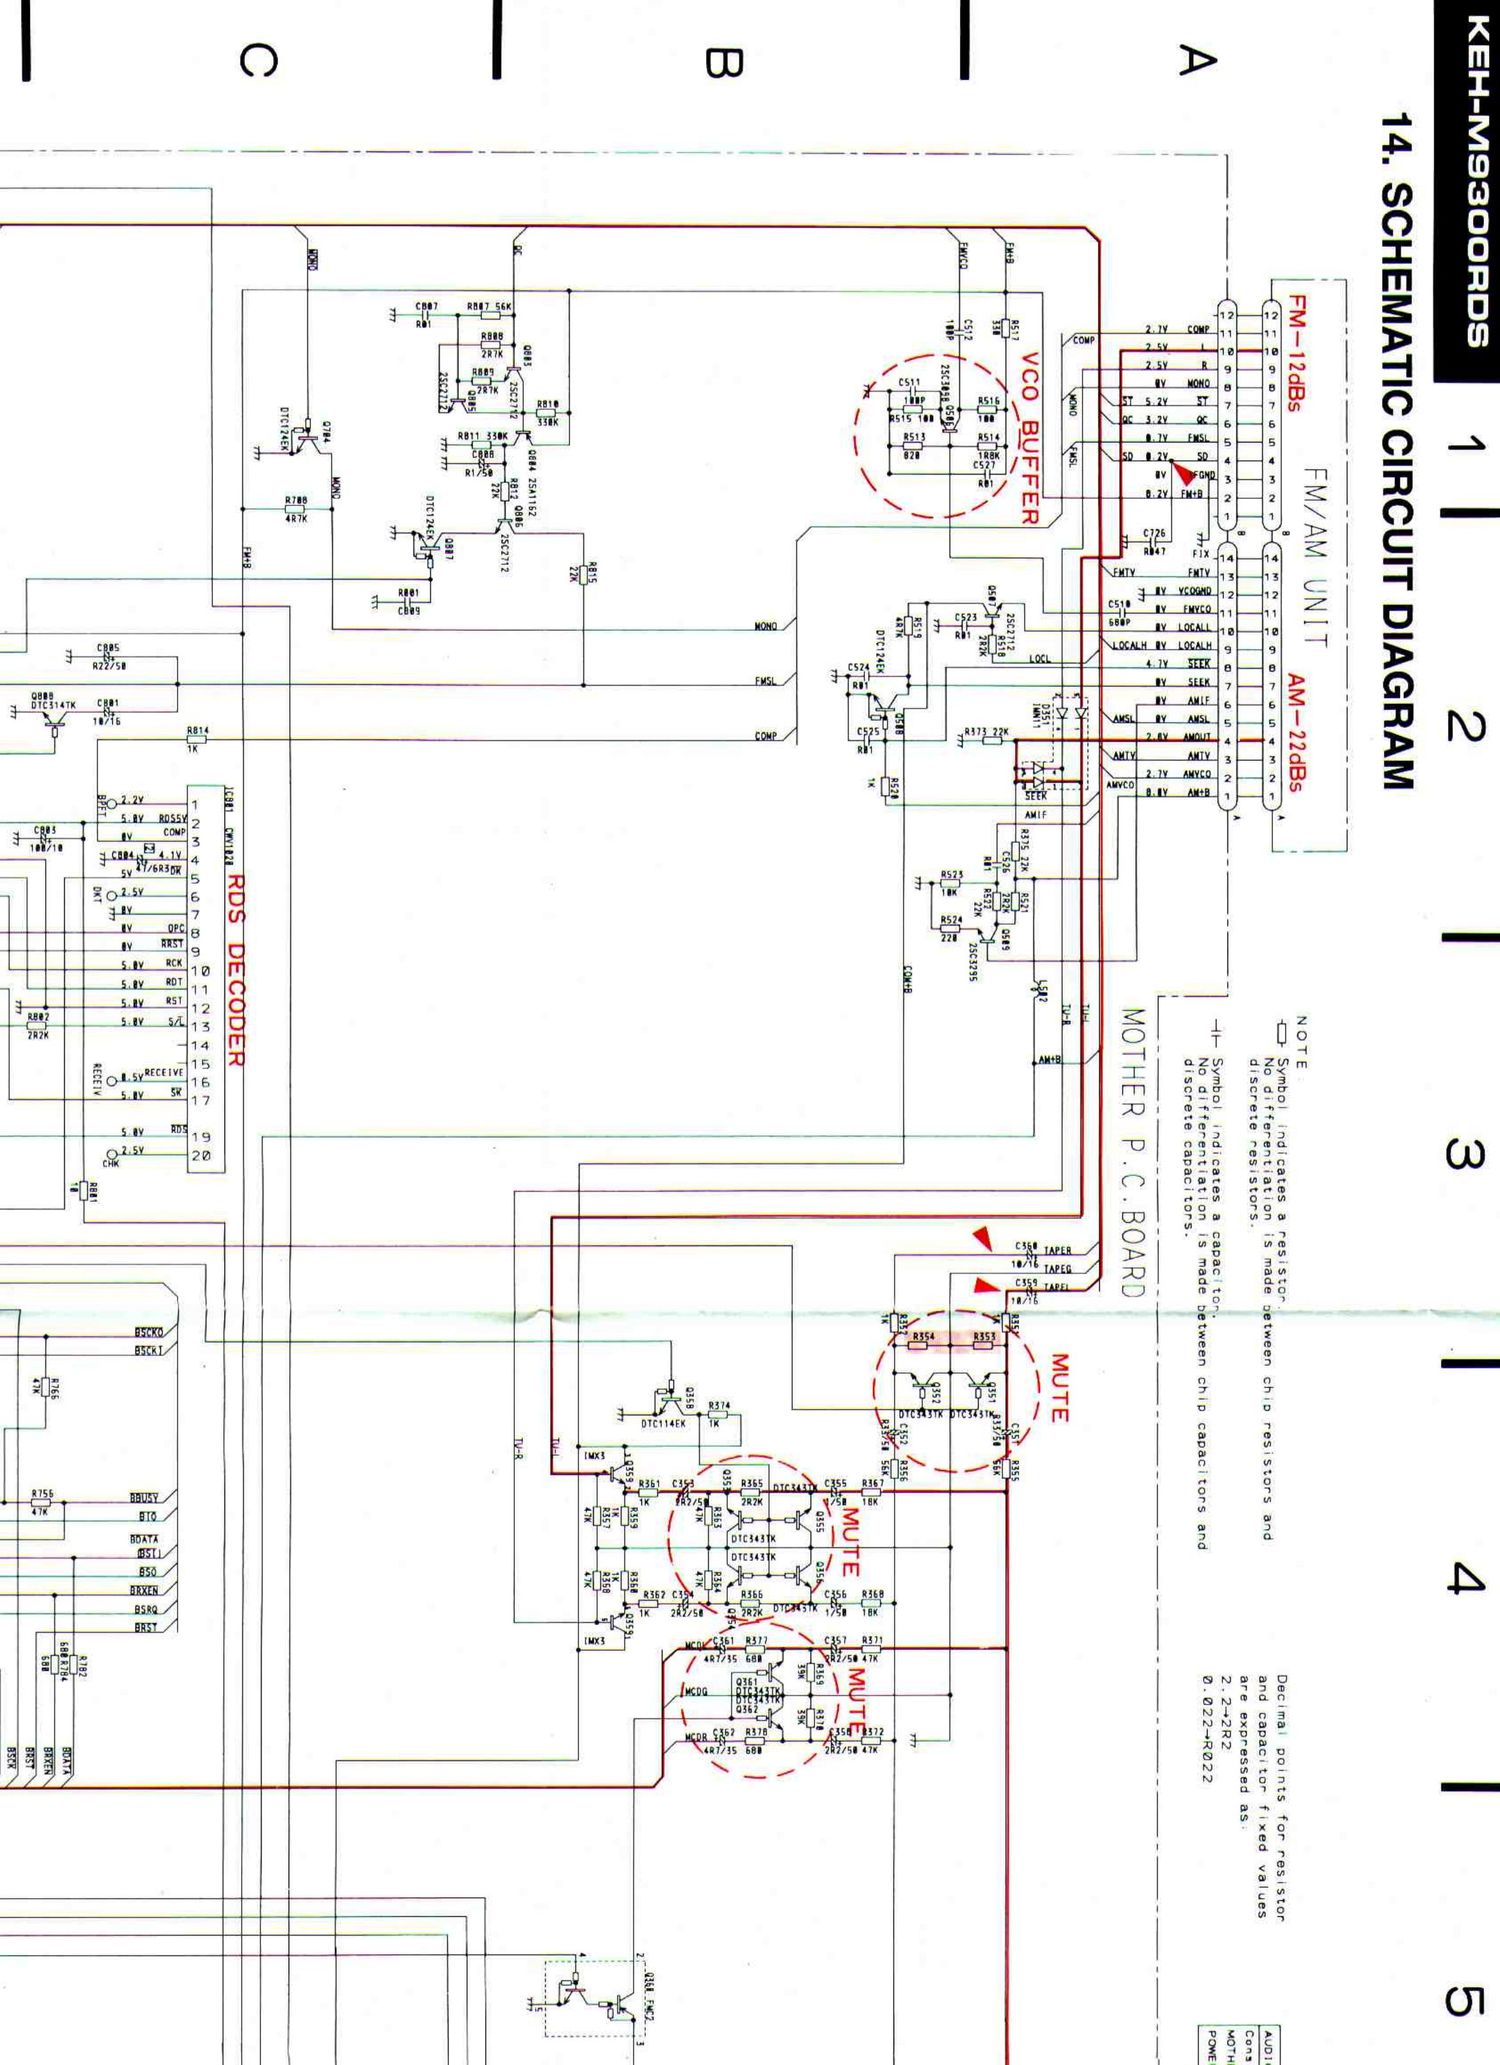 pioneer kehm 8300 rds schematic